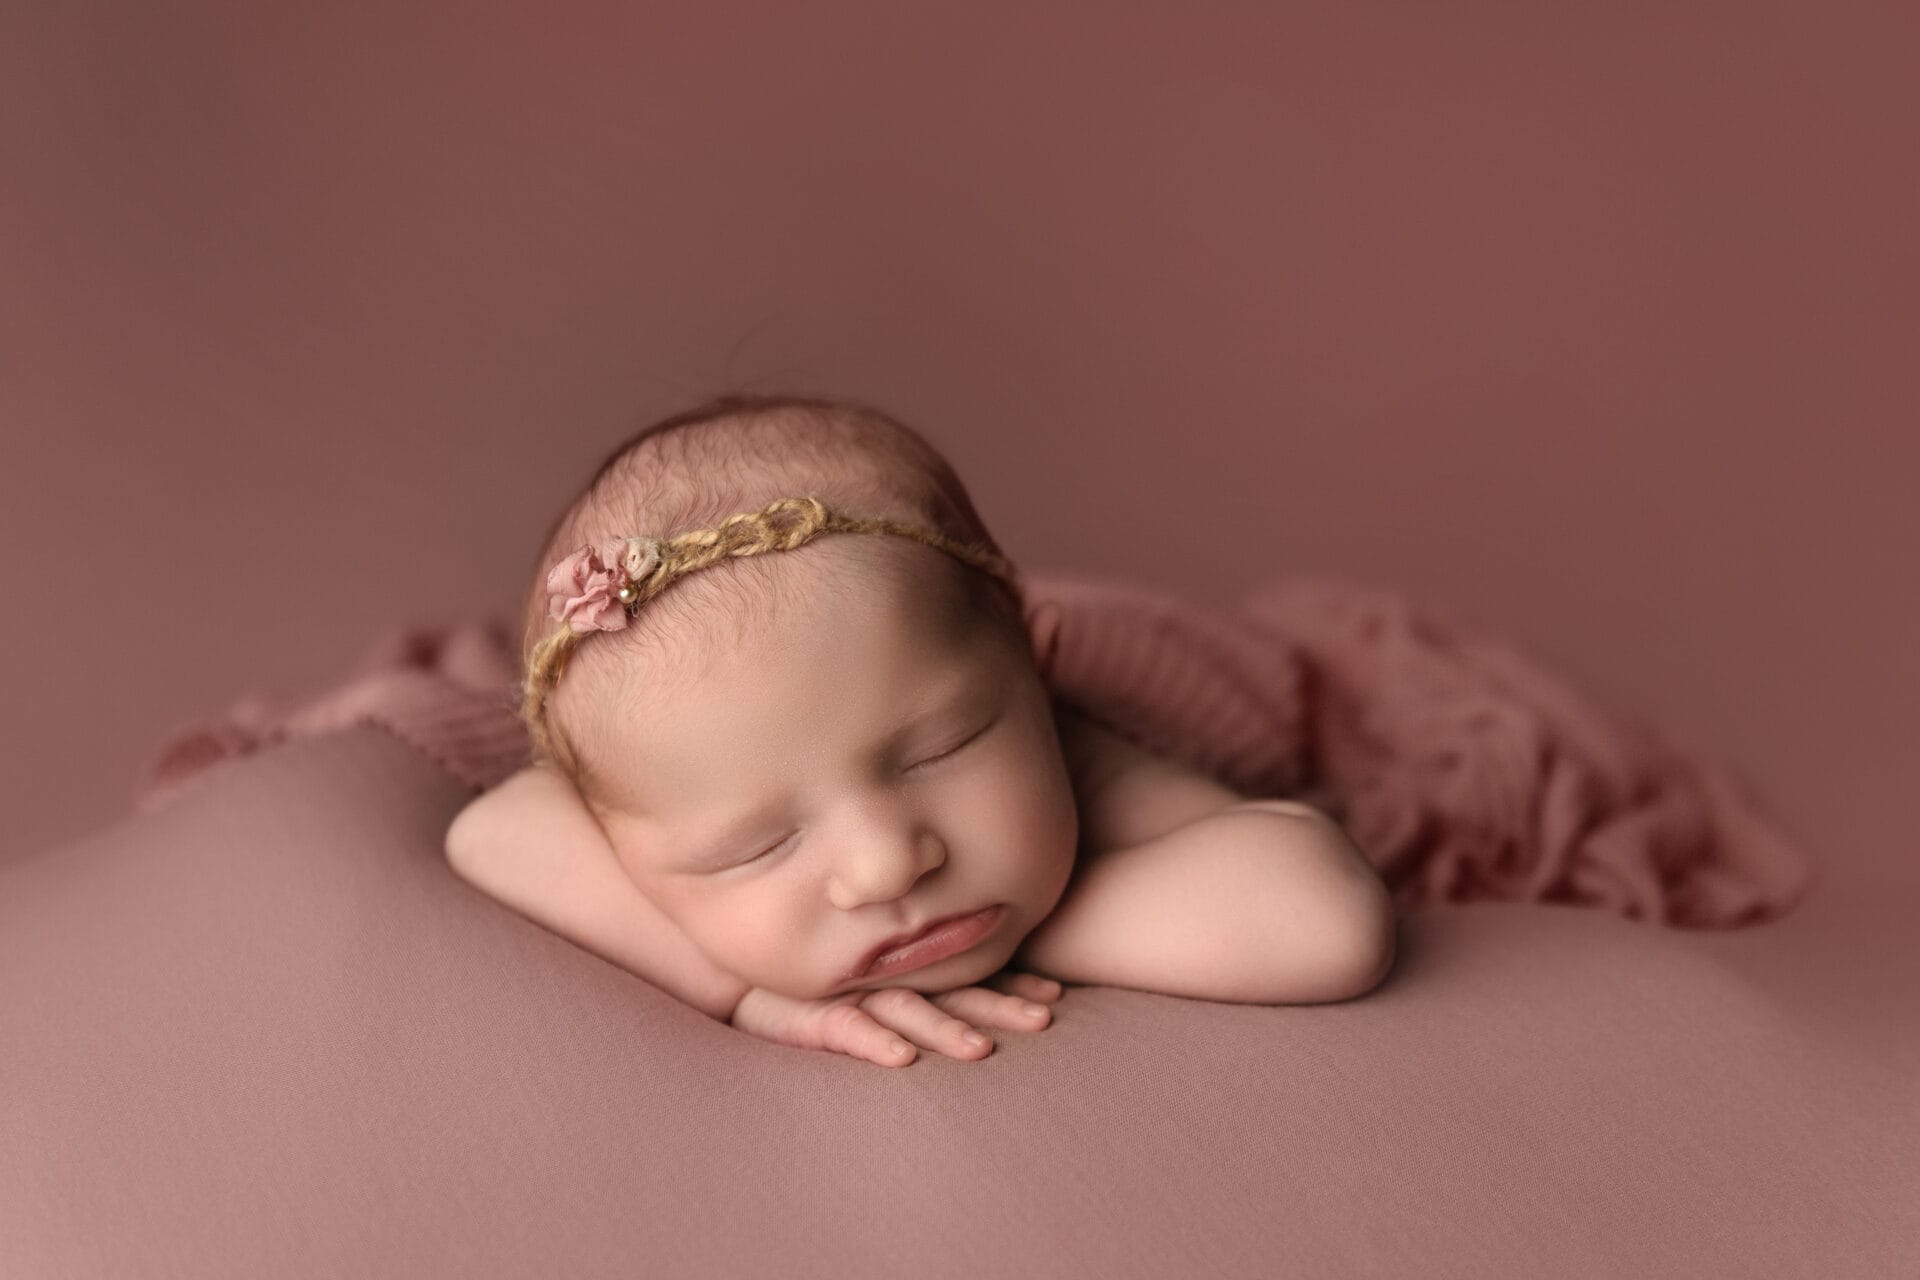 A baby girl in the studio lies on a pink backdrop, a wrap draped over her back, resting her head on her hands, wearing a pink flower headband.